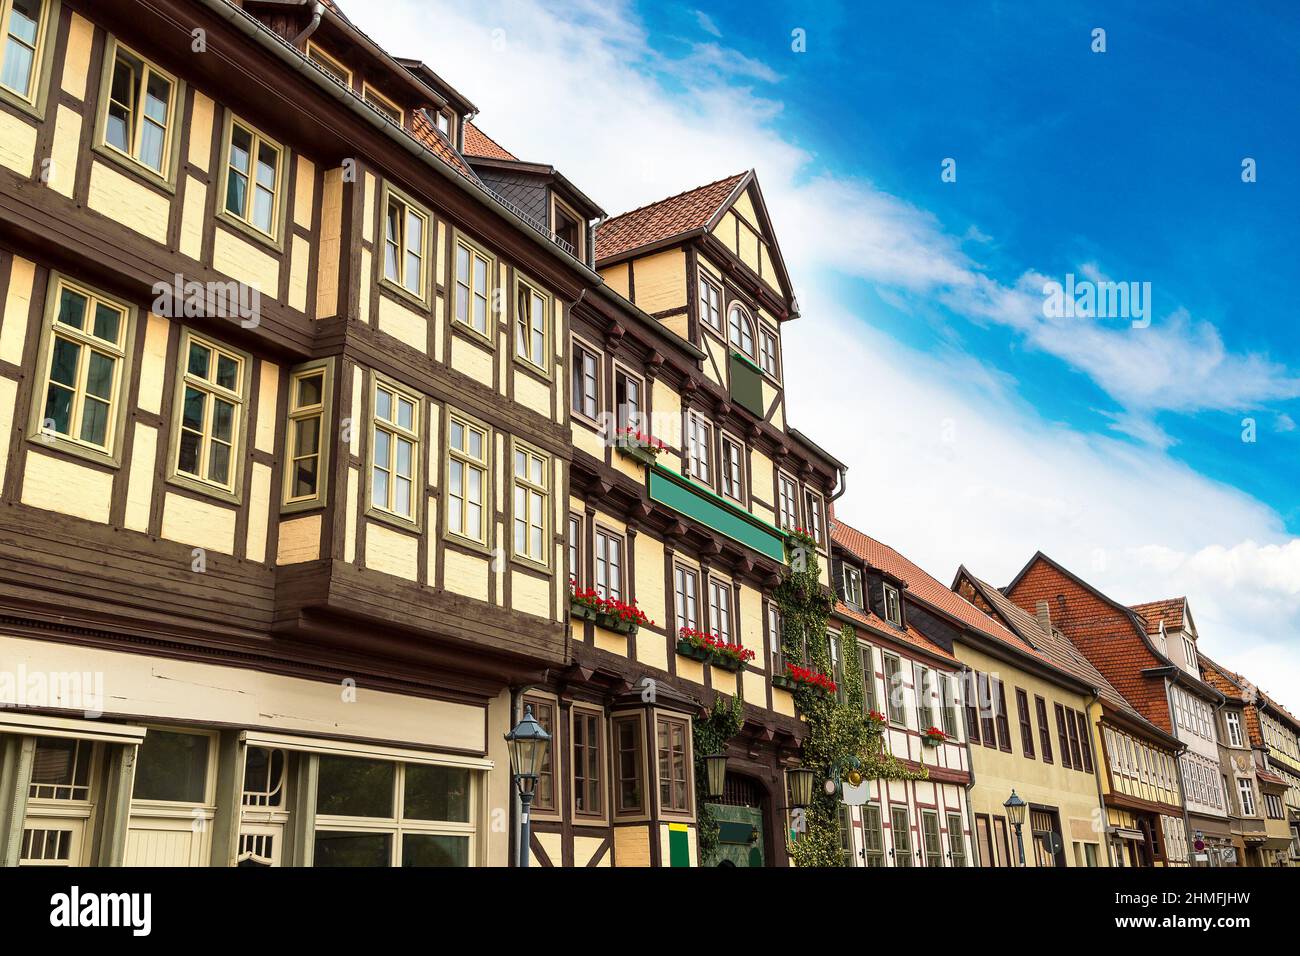 Historic houses in Quedlinburg in a beautiful summer day, Germany Stock Photo